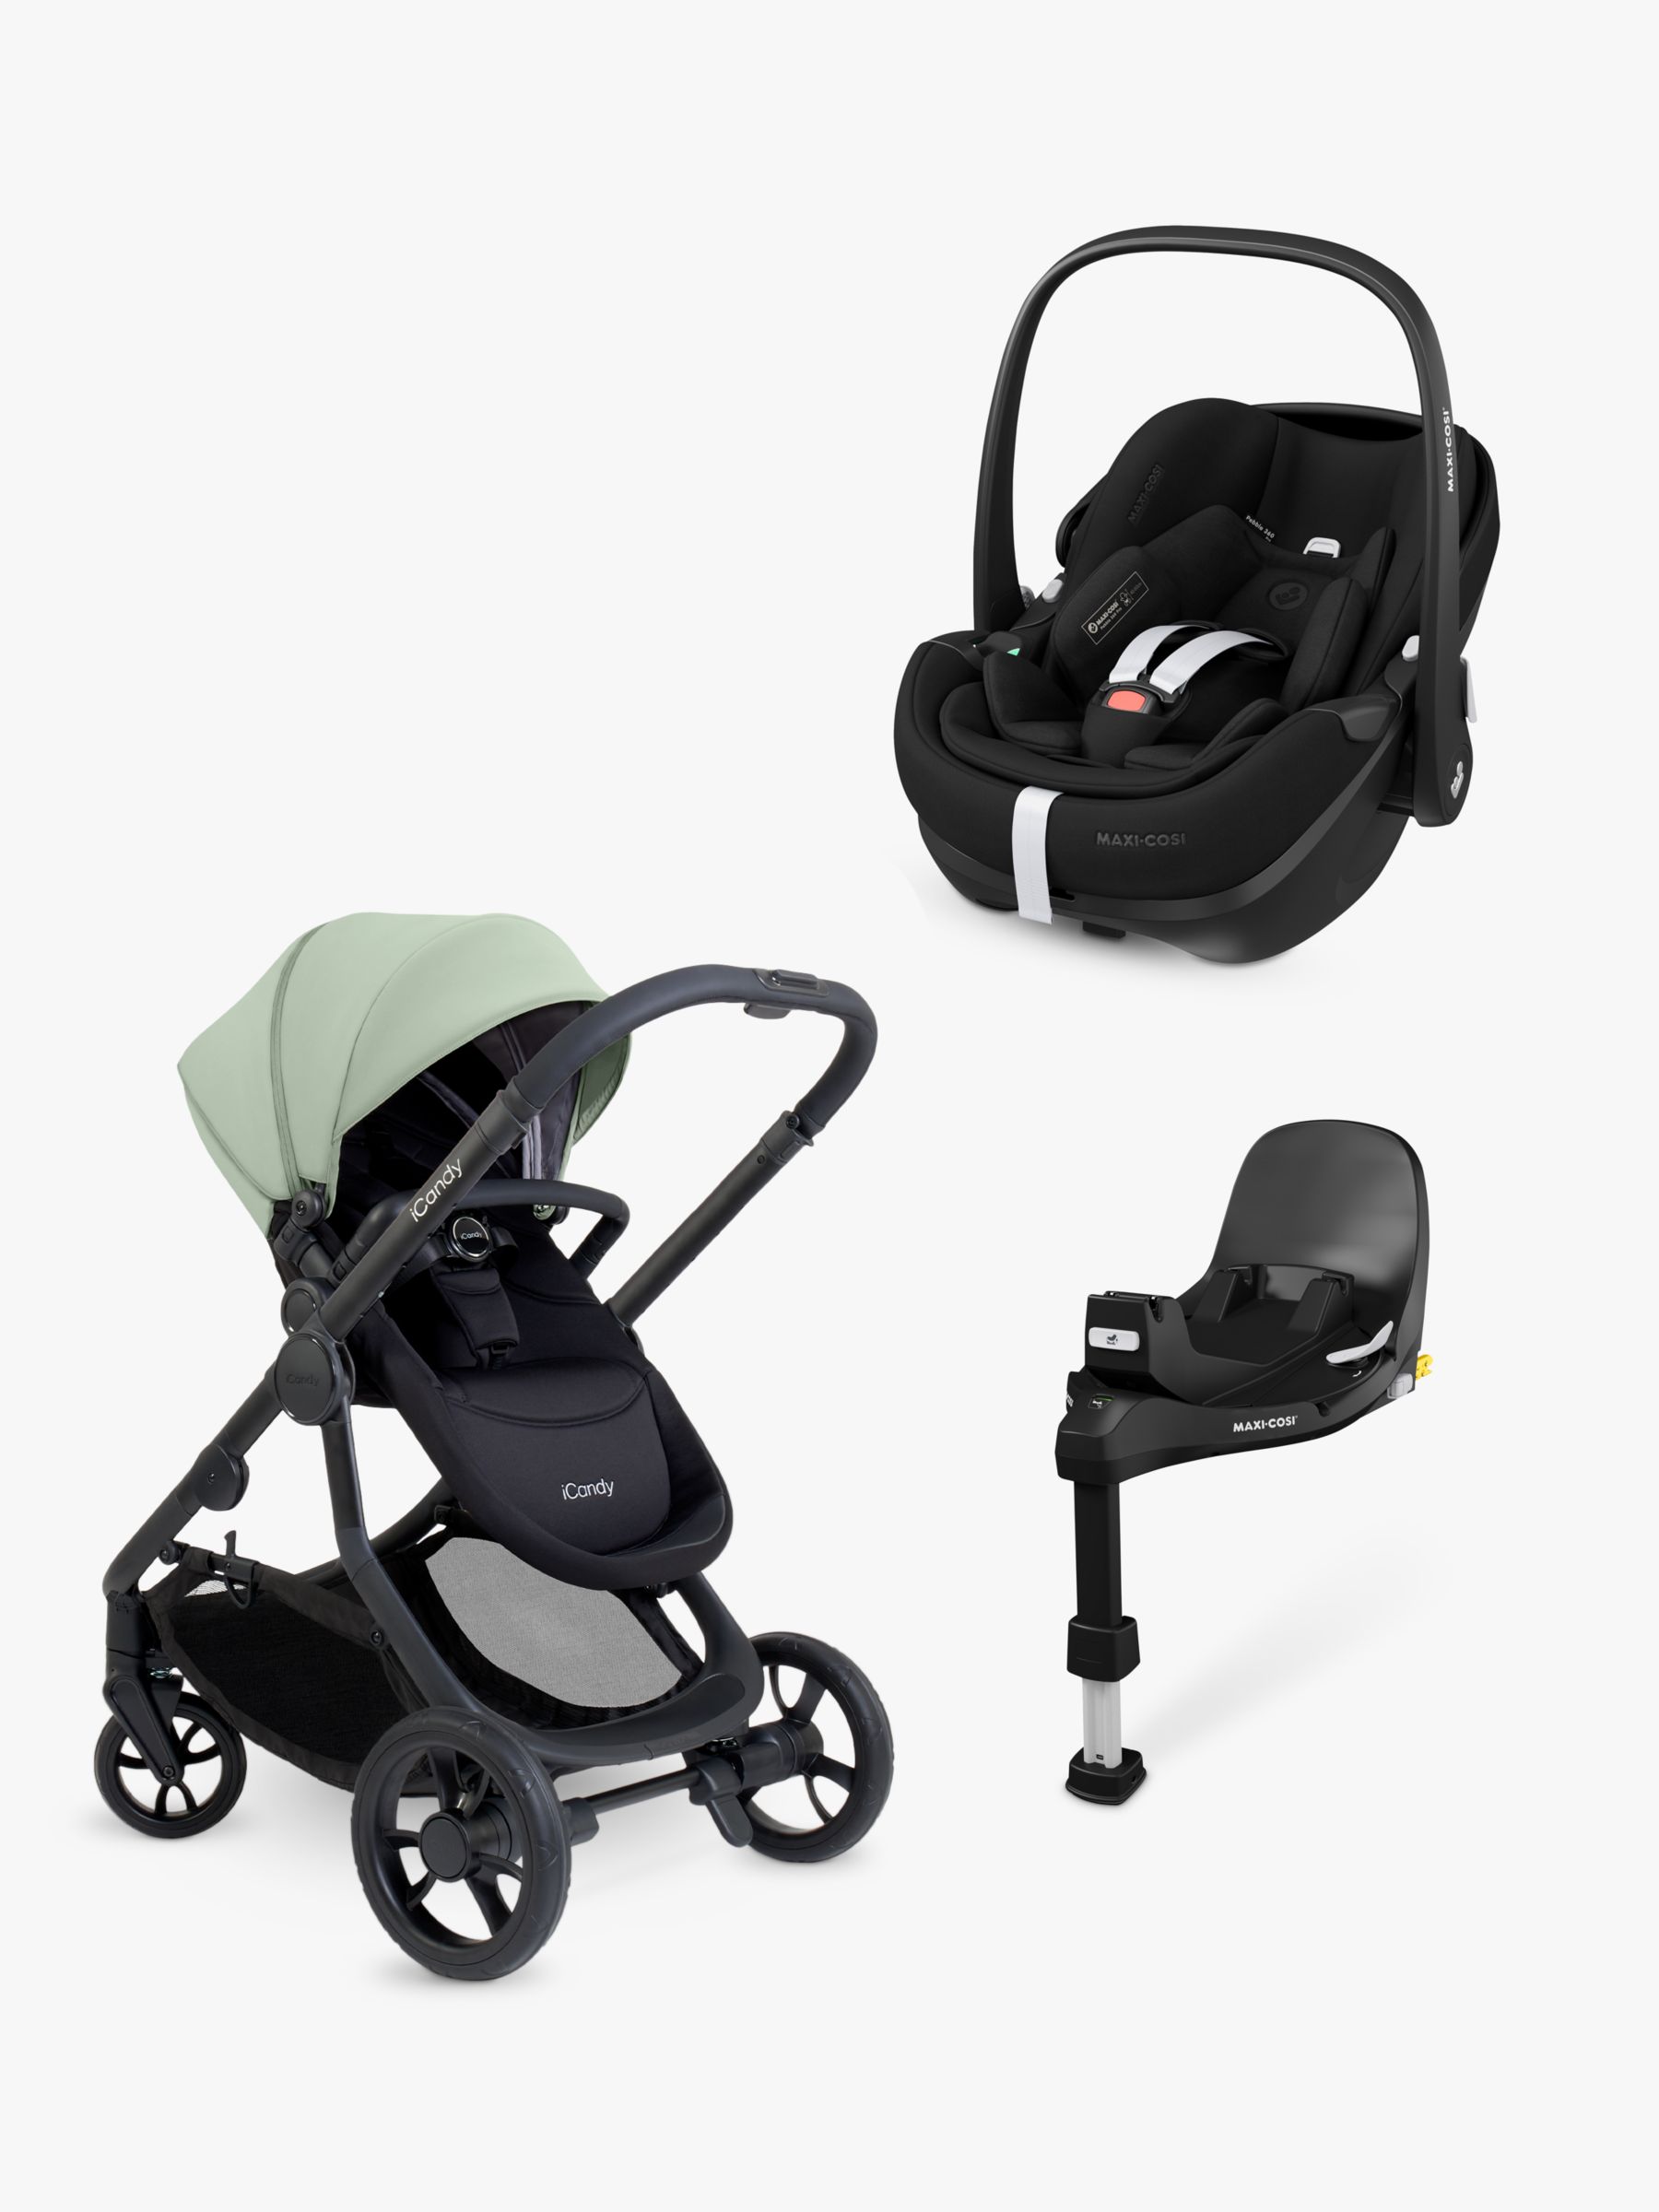 iCandy 4 Pushchair with Maxi-Cosi Pebble 3...